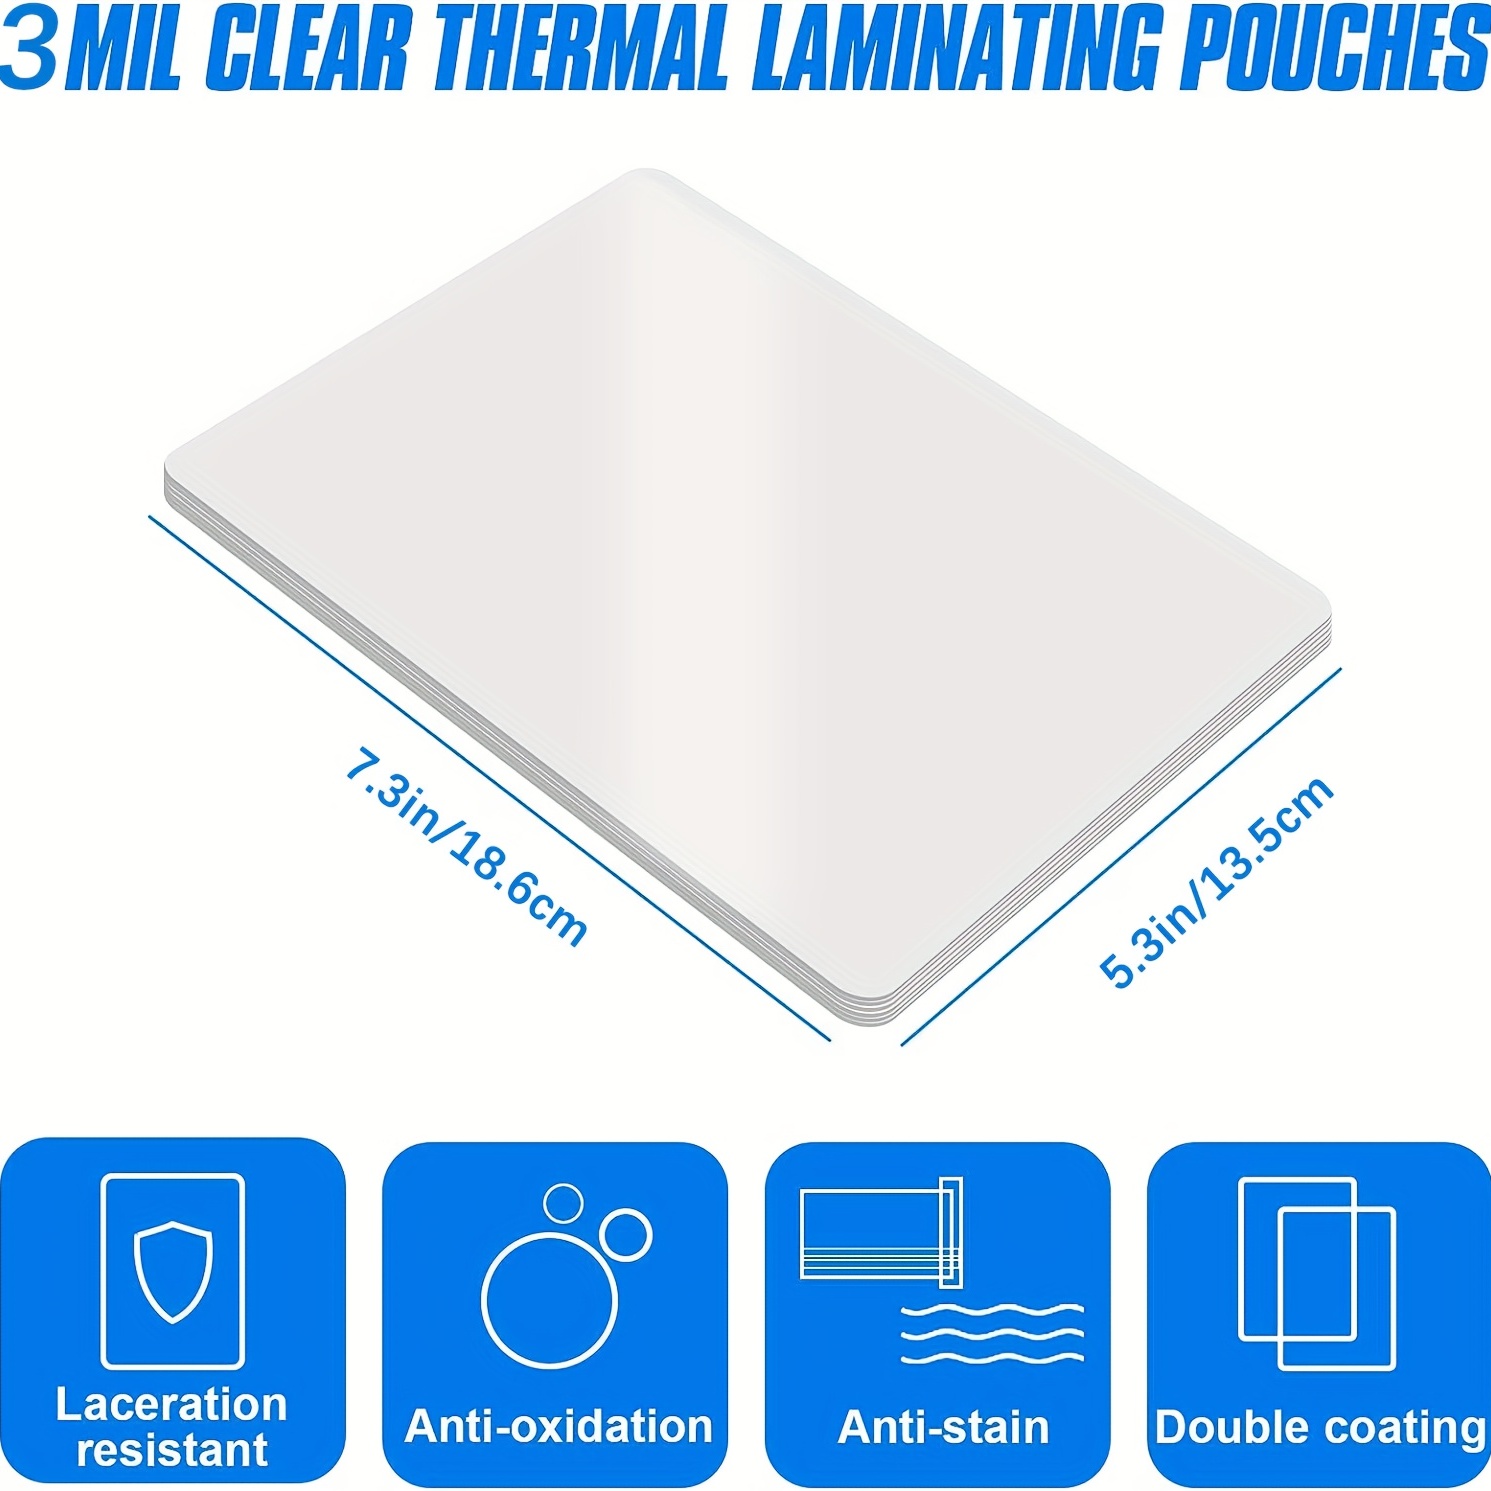  Self Adhesive Lamination Sheets, 9 X 11.5 Inches, 4 Mil  Thick, Suited For Letter Size Self Seal Laminating Sheets 8.5 X 11, 20 Pack